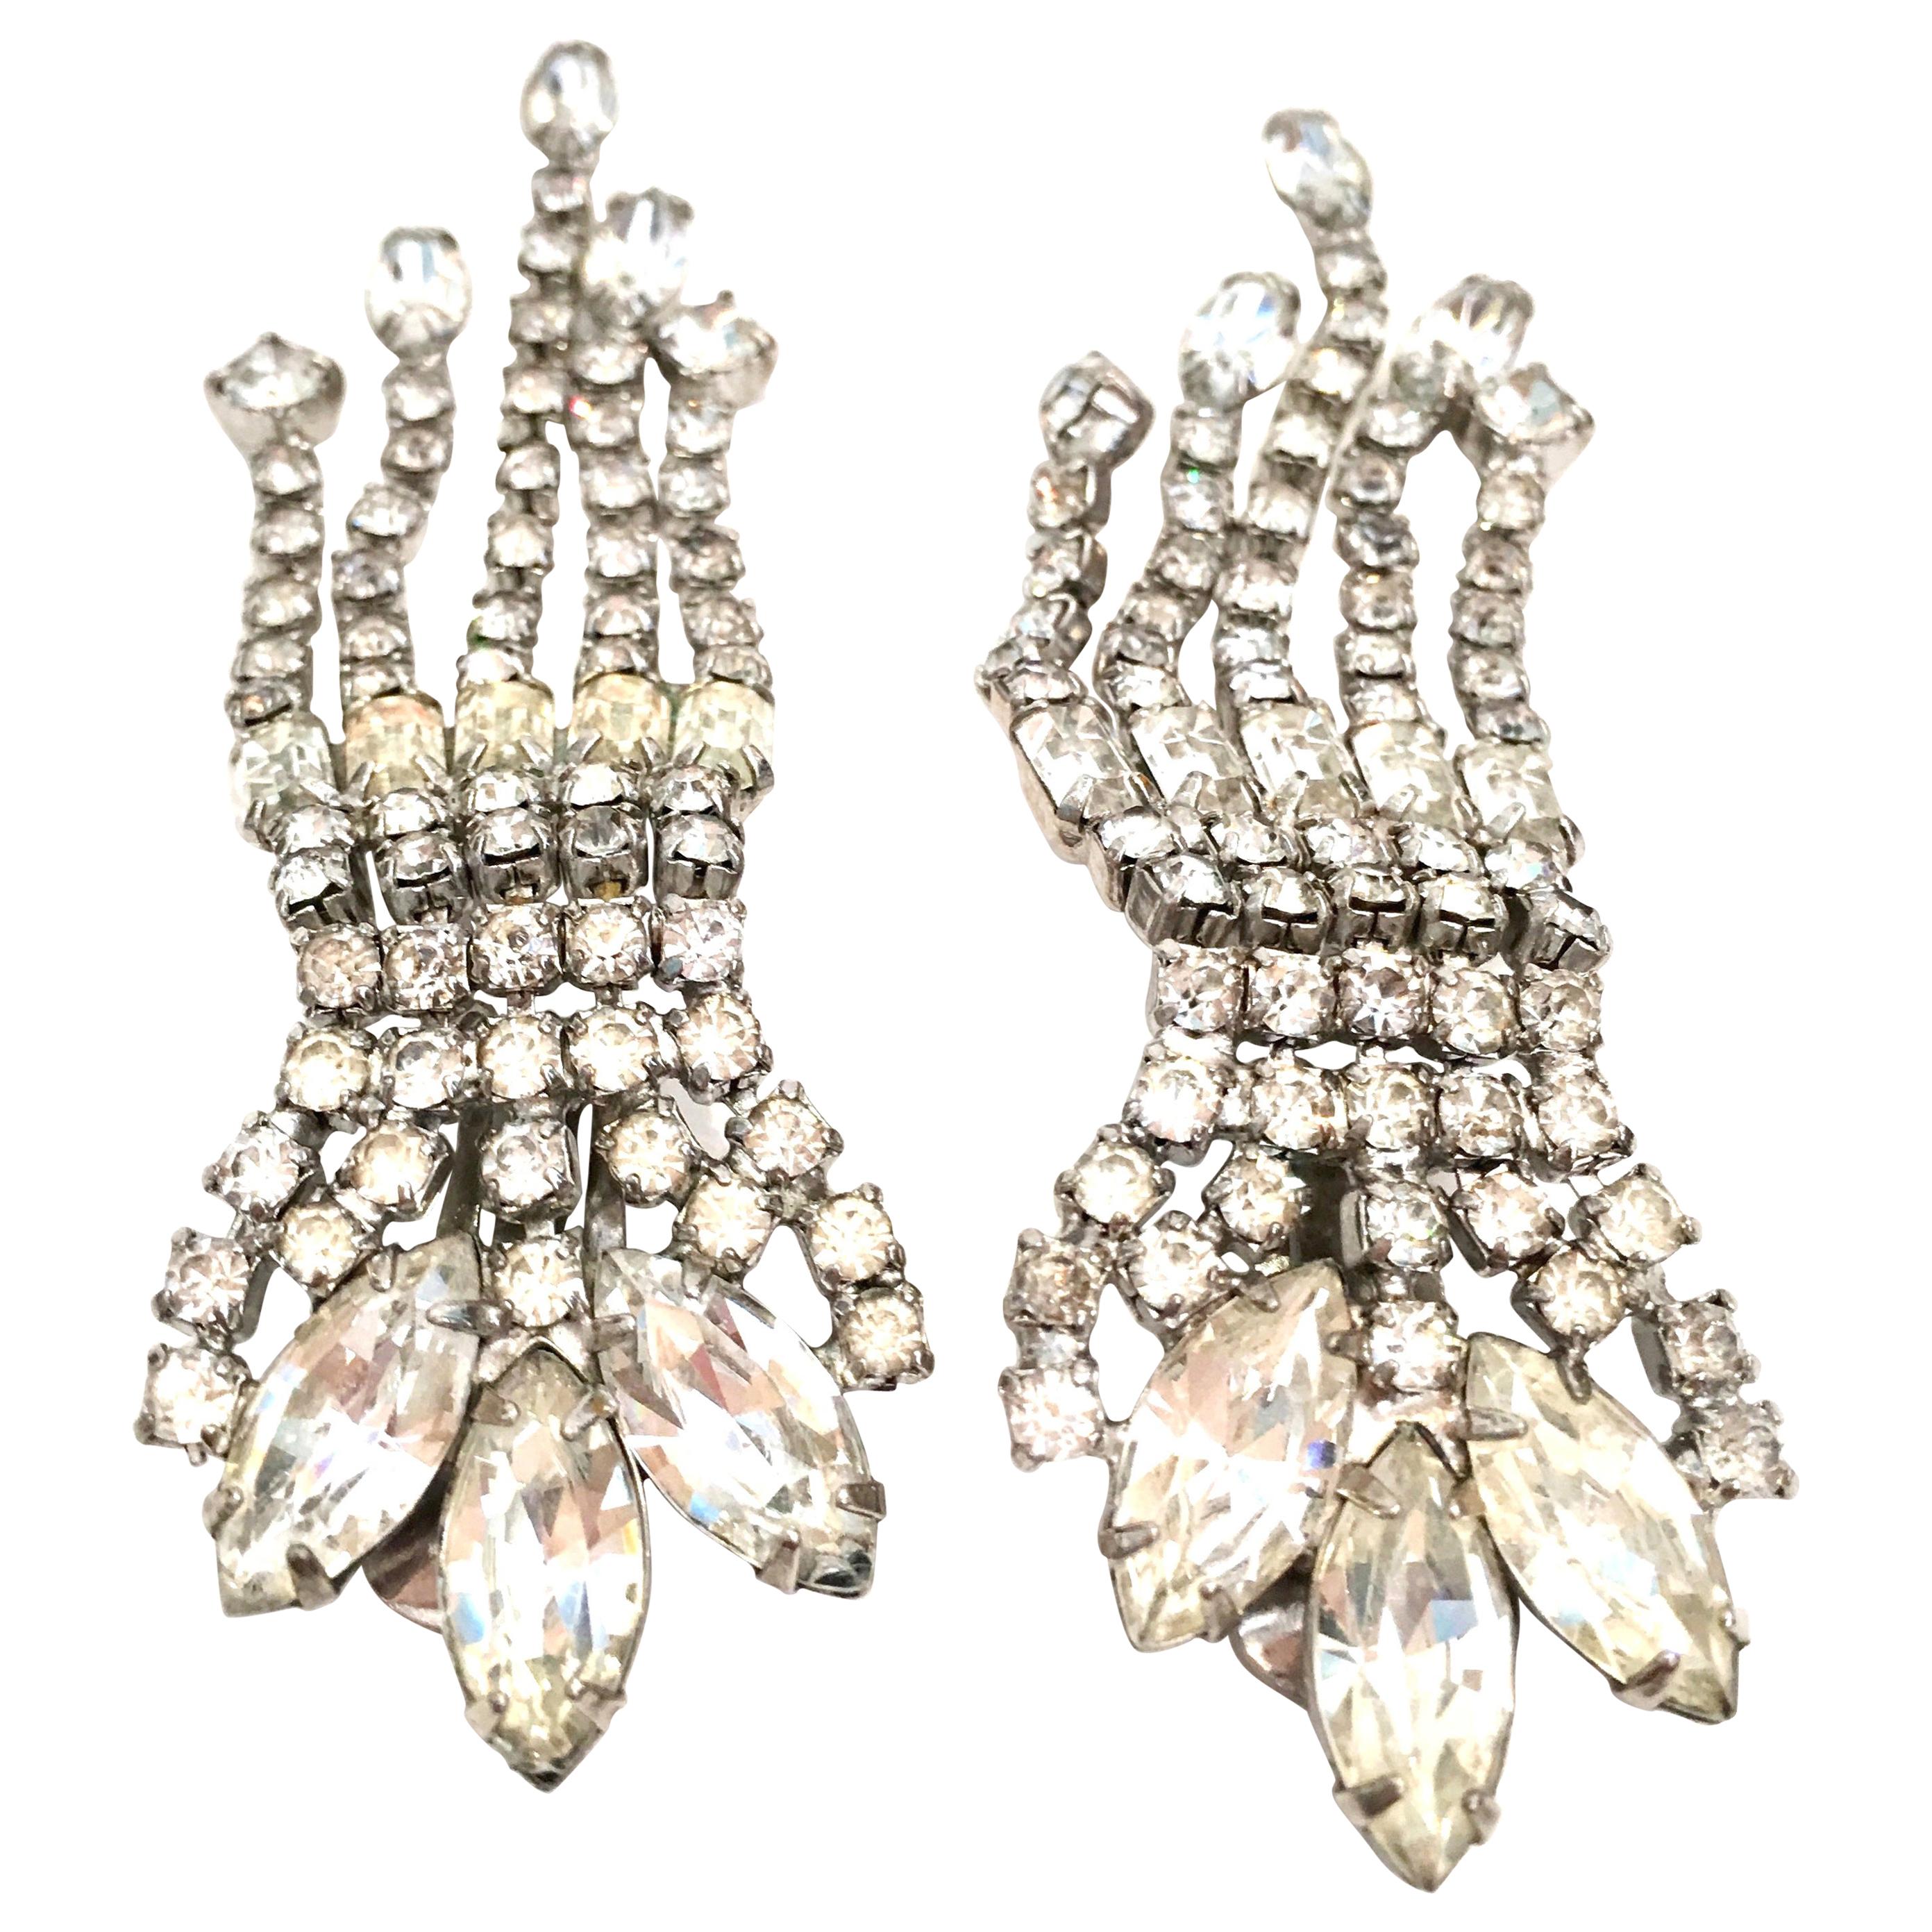 20th Century Weiss Style Silver & Swarovski Crystal chandelier earrings. These clip style earrings feature rhodium plate base metal with brilliant prong set cut and faceted pear, square, round and dramatic baguettes crystal clear stones.